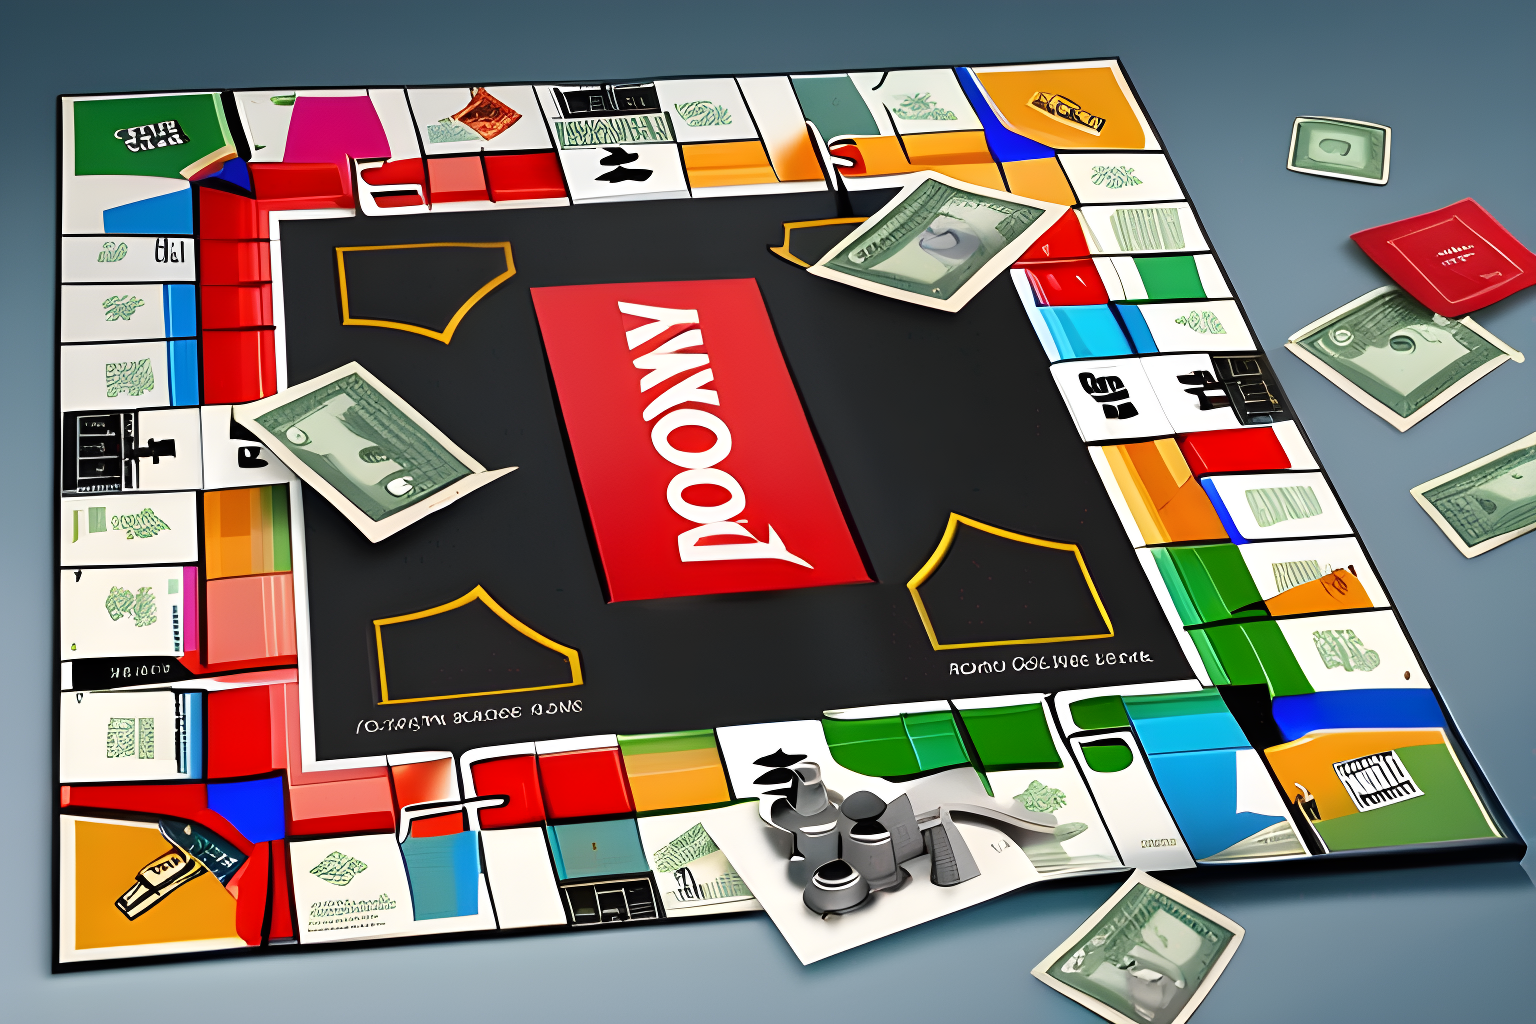 illustrate a microsoft branded monopoly board being torn apart.